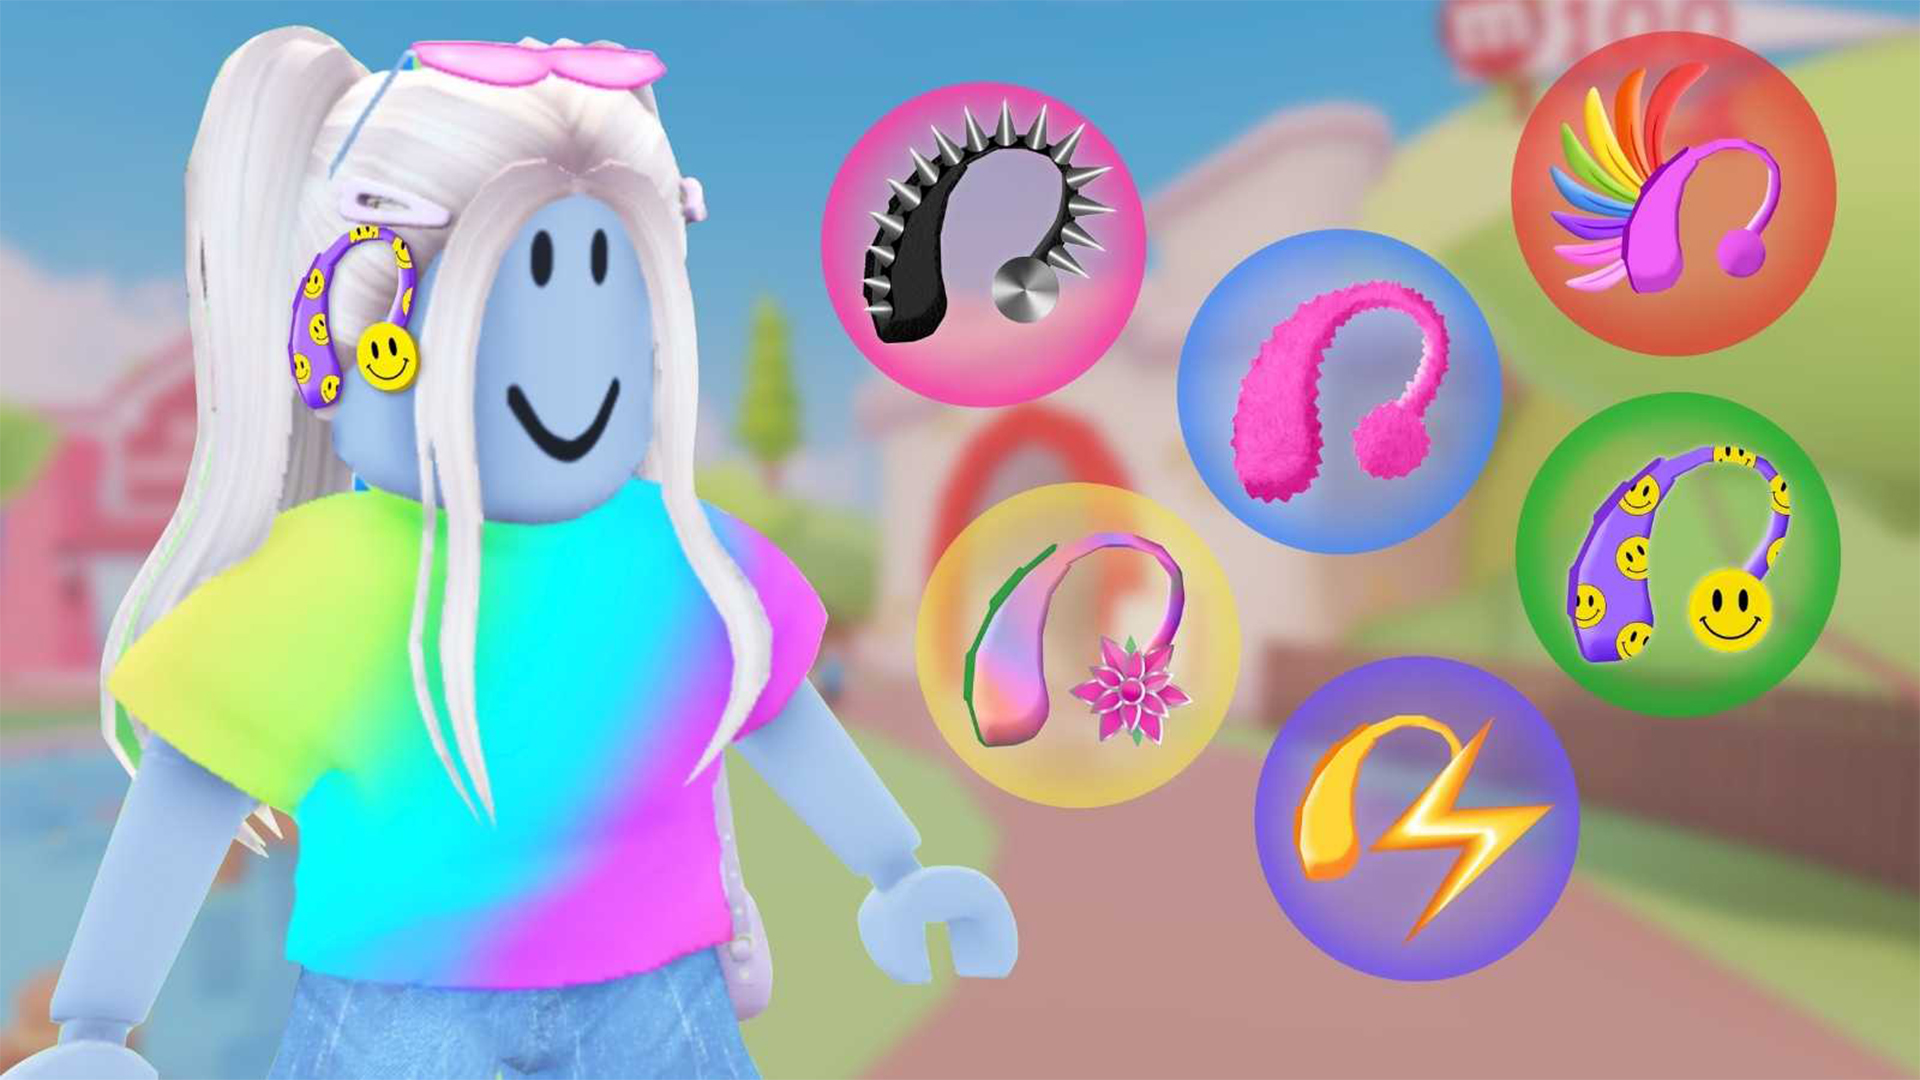 A new Roblox cosmetic line celebrates representation in the metaverse